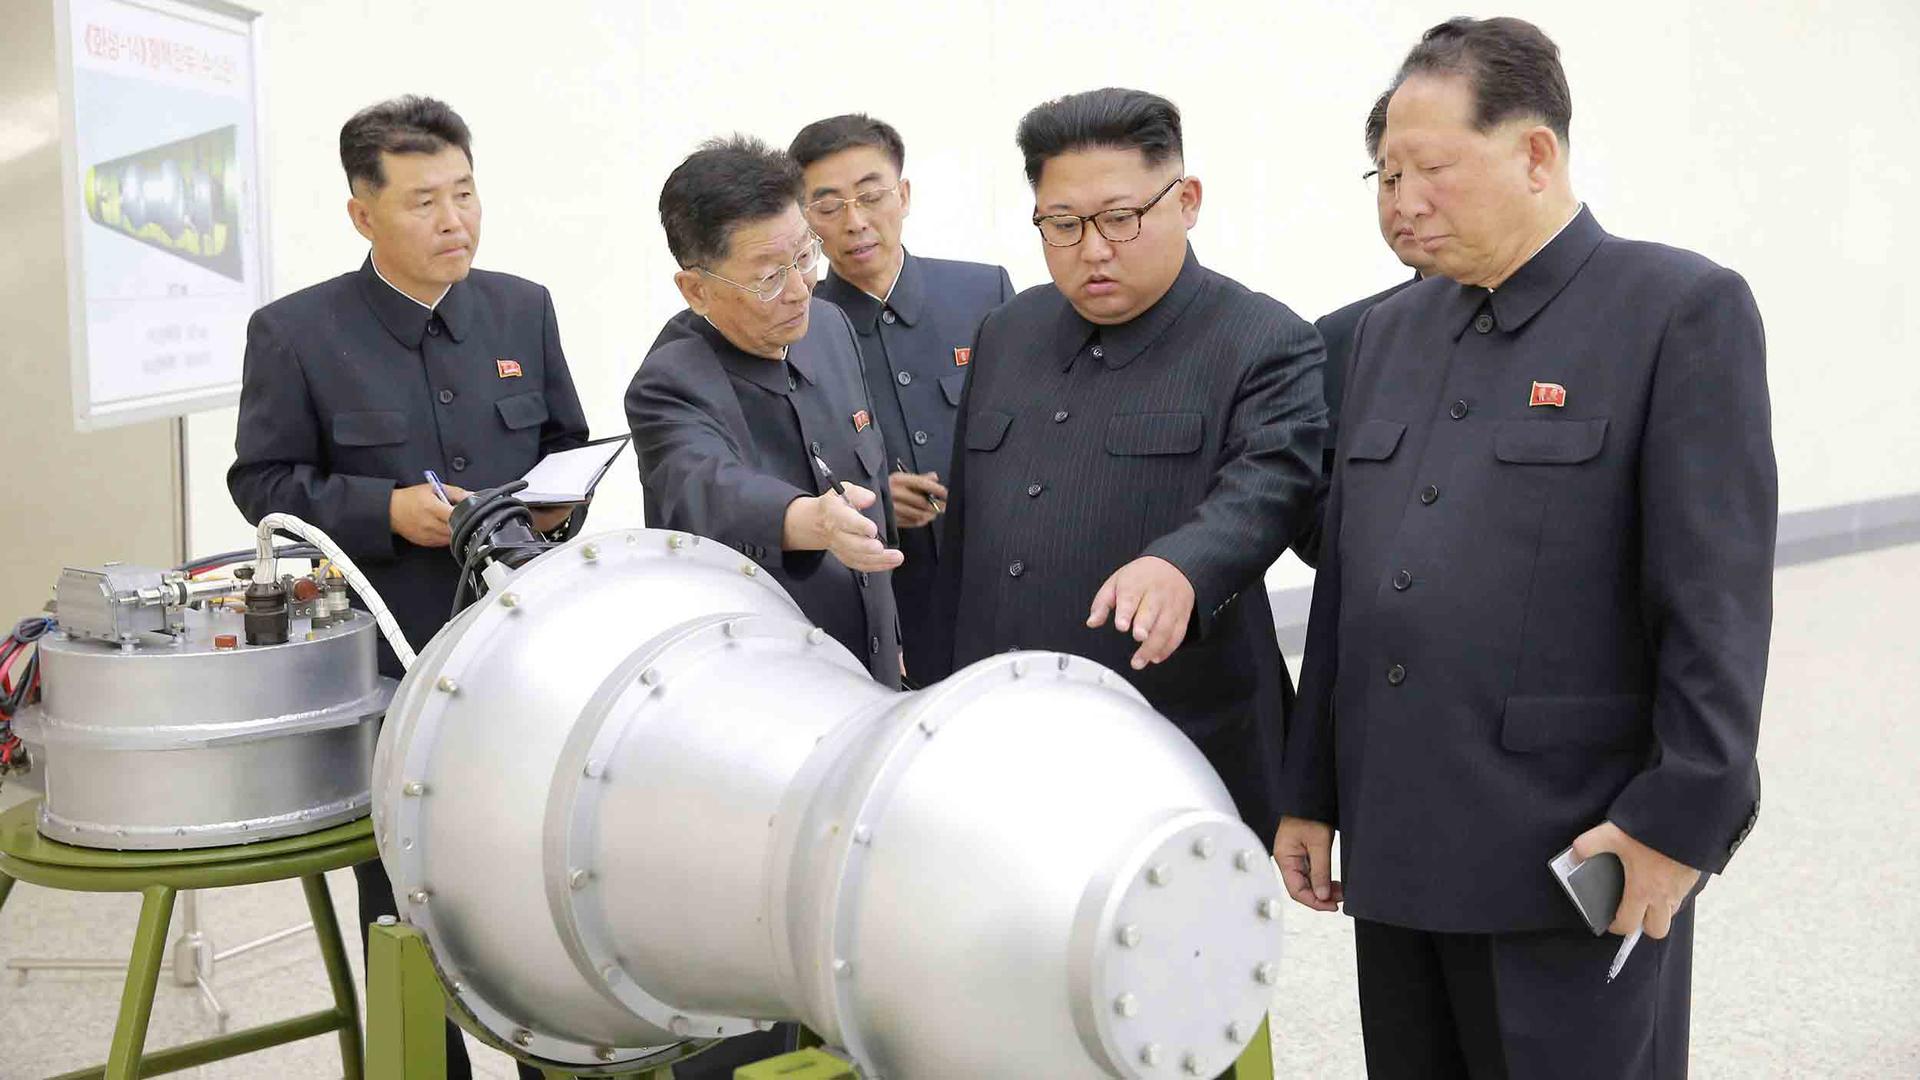 Kim Jong-un inspects a large metal piece of equipment with others around him. 